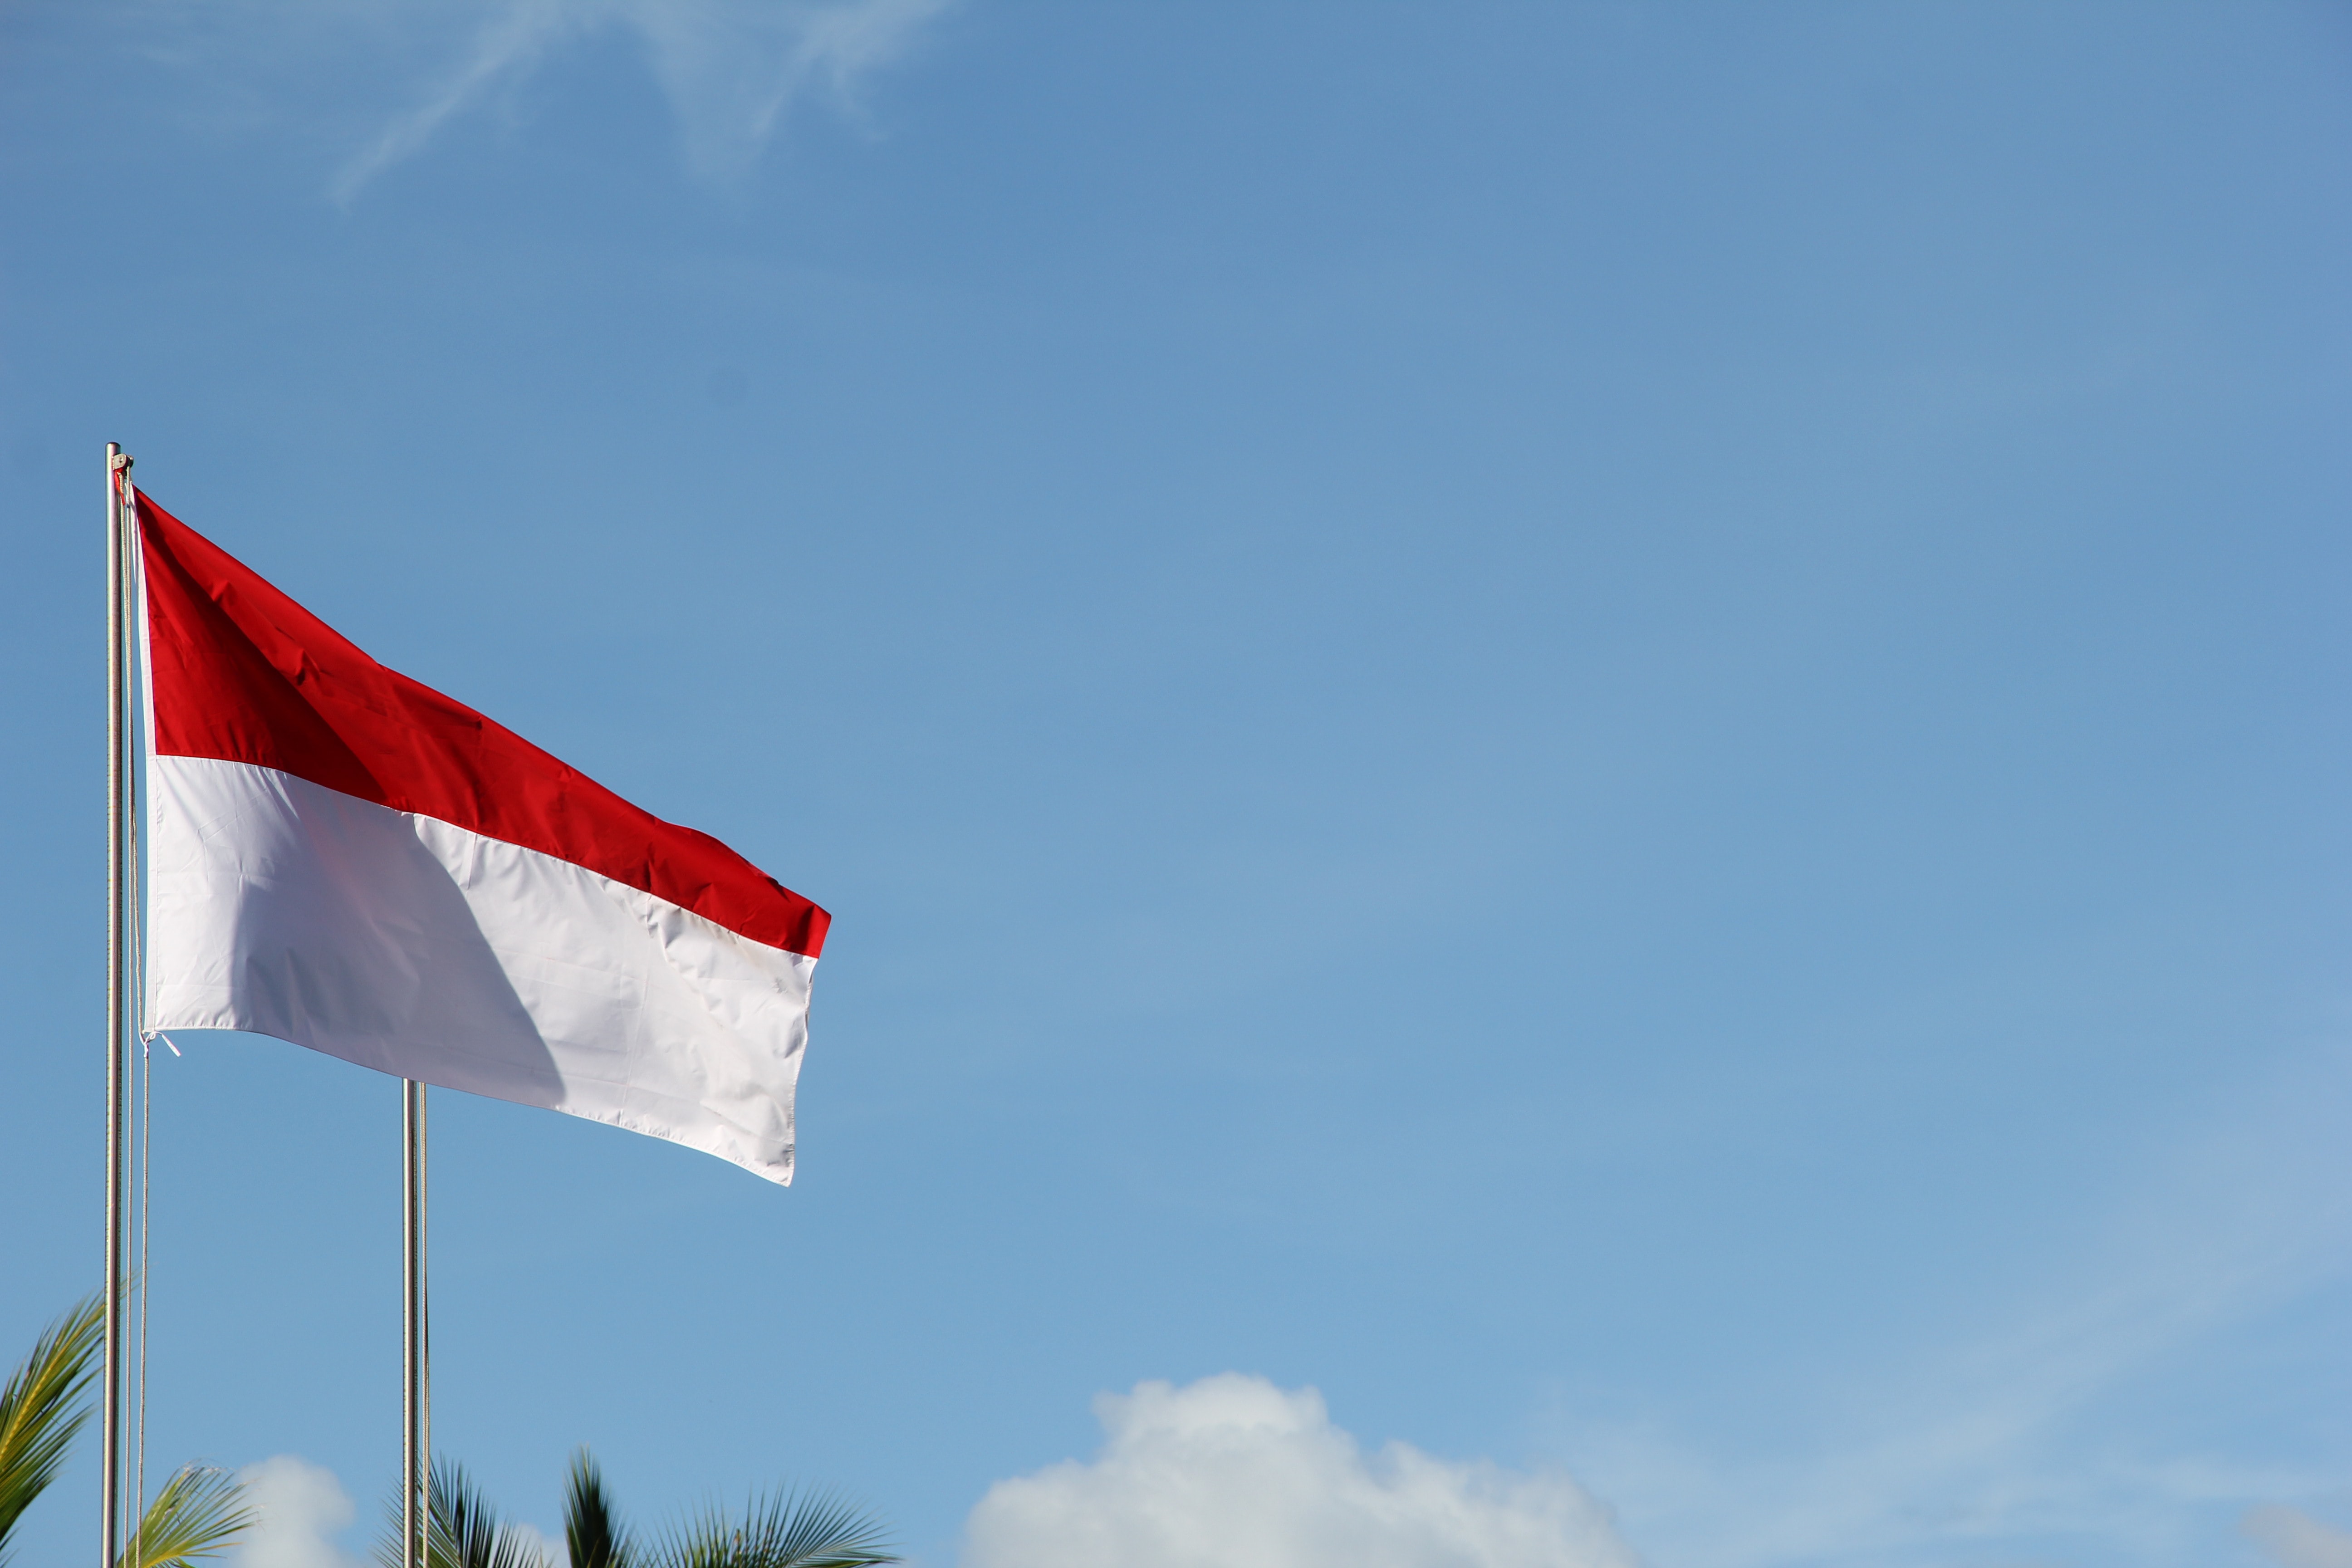 Binance in Talks With Indonesian Heavyweights for Crypto Venture: Report